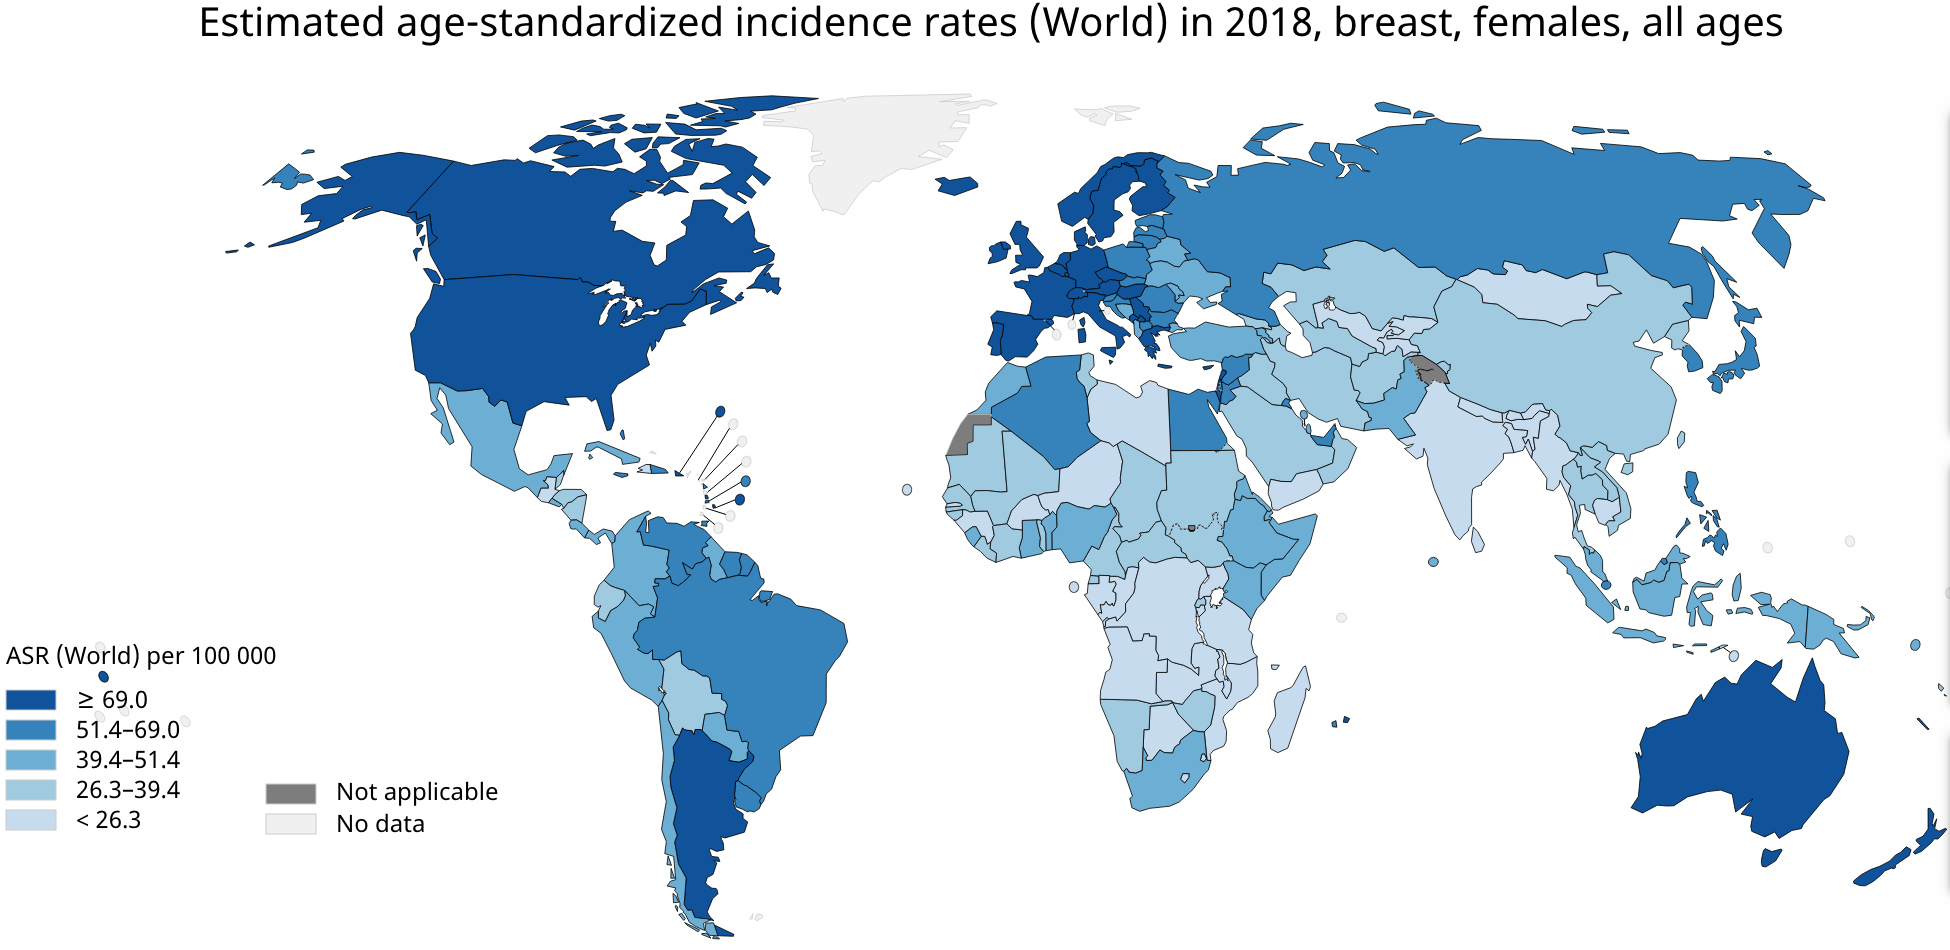 breast cancer research and treatment acceptance rate